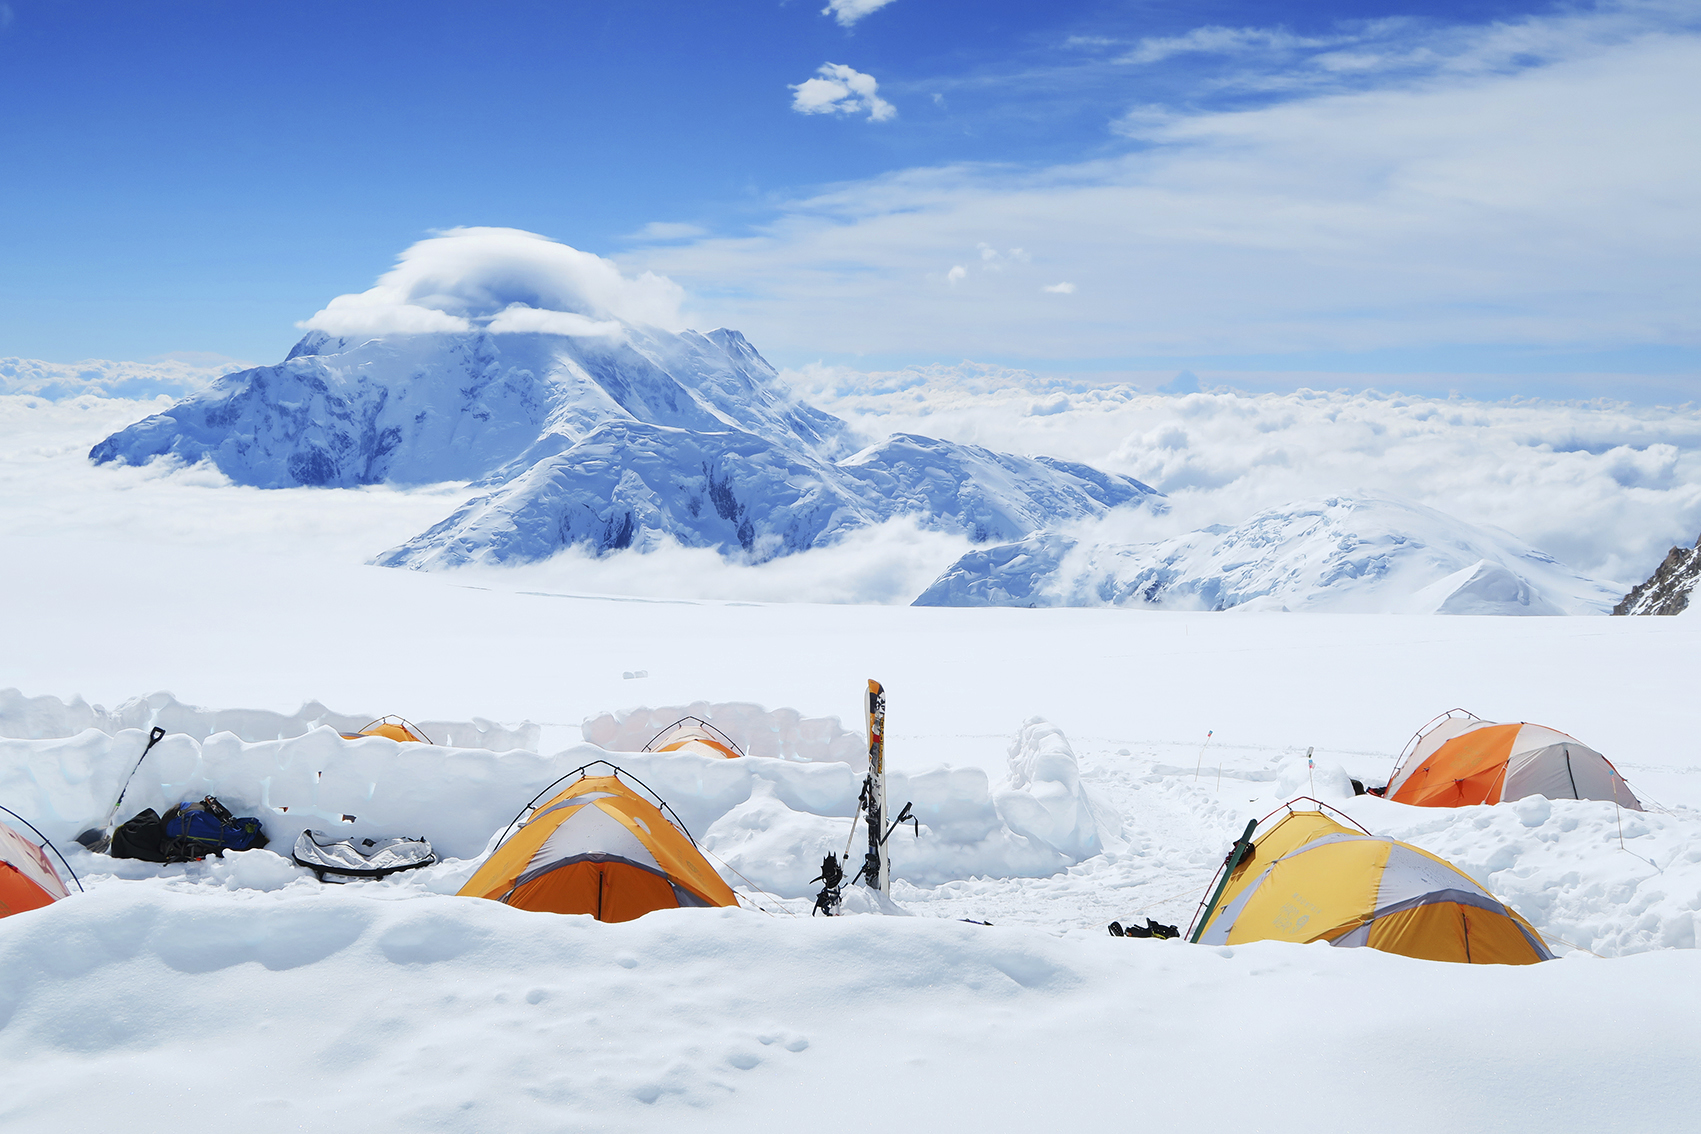 View of tents at the 14,200-foot camp